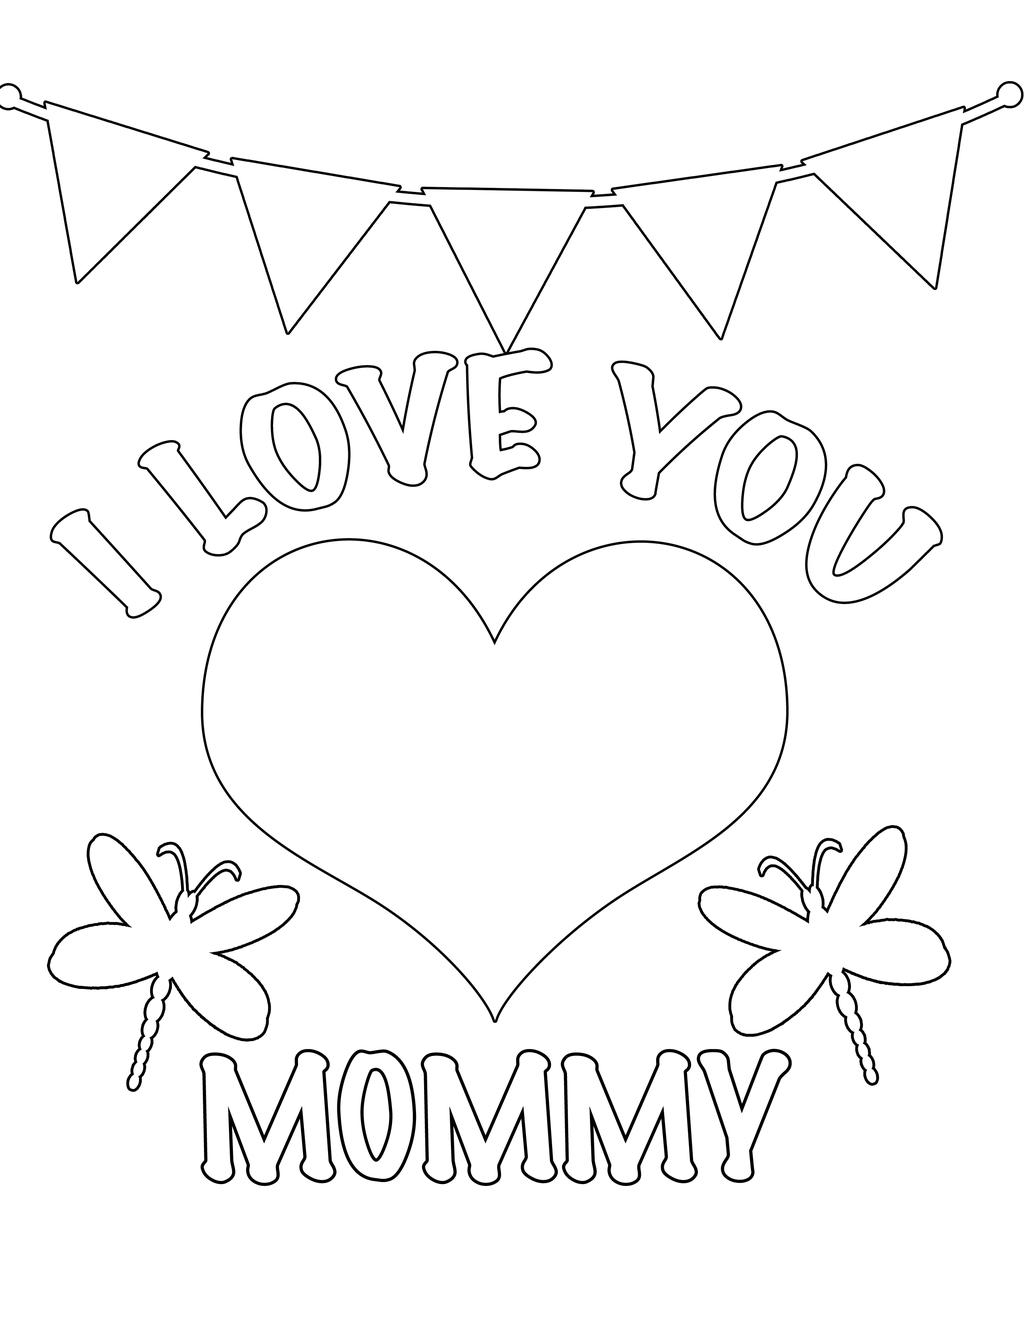 Free Thank You For Your Service Coloring Pages I Love You Mommy printable